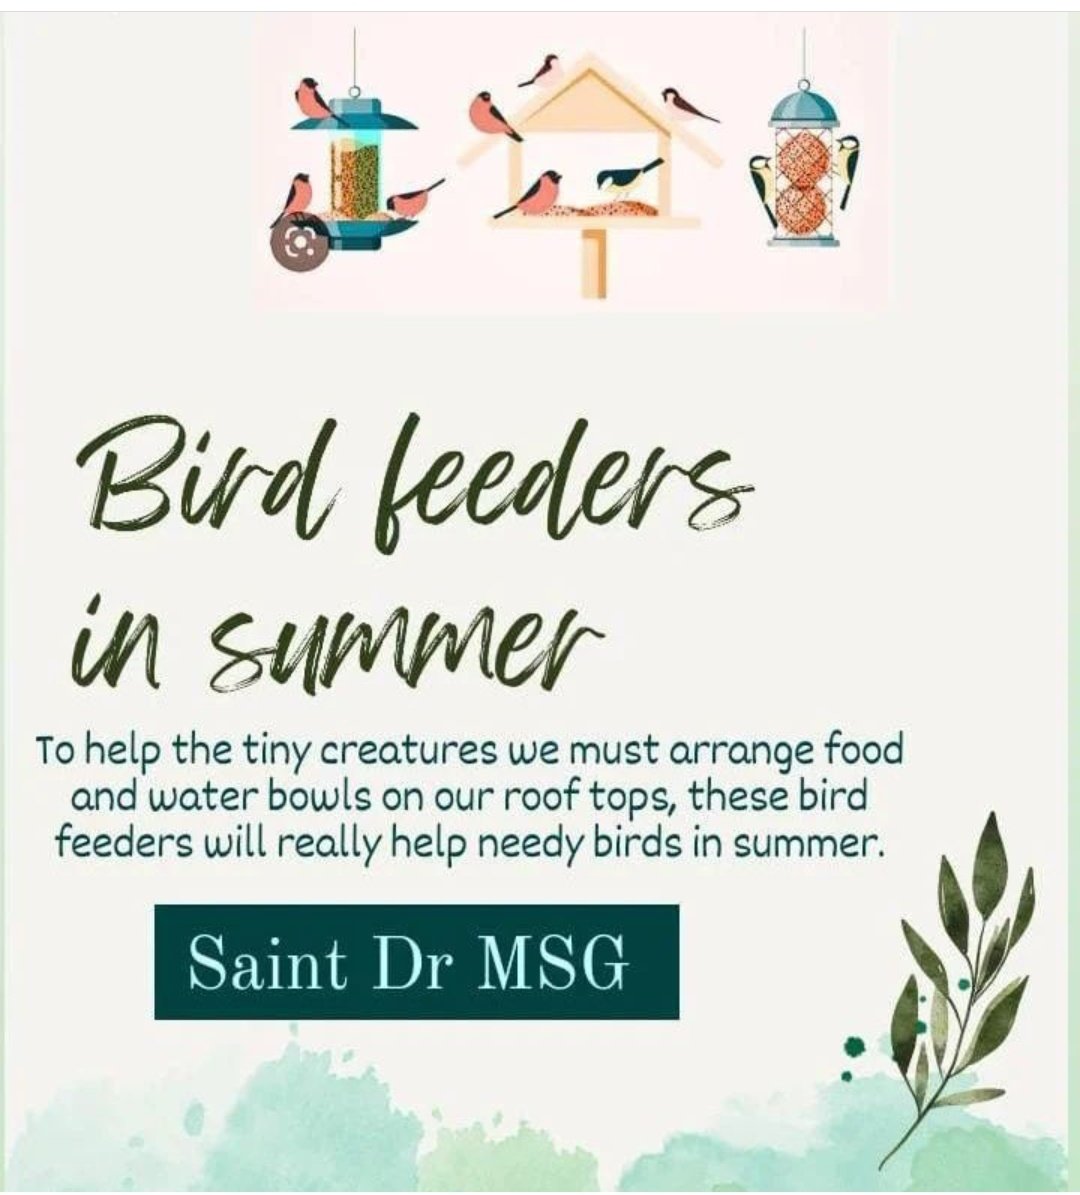 Many birds🐦🐦 lose their lives due to the scorching sun and heat. Following the inspiration of Saint Gurmeet Ram Rahim G, to save the little🐥🐥 birds, the servants of Dera Sacha Sauda keep grains and water for the birds on the roof of their houses. 
#SummerCare
#SaintDrMSG